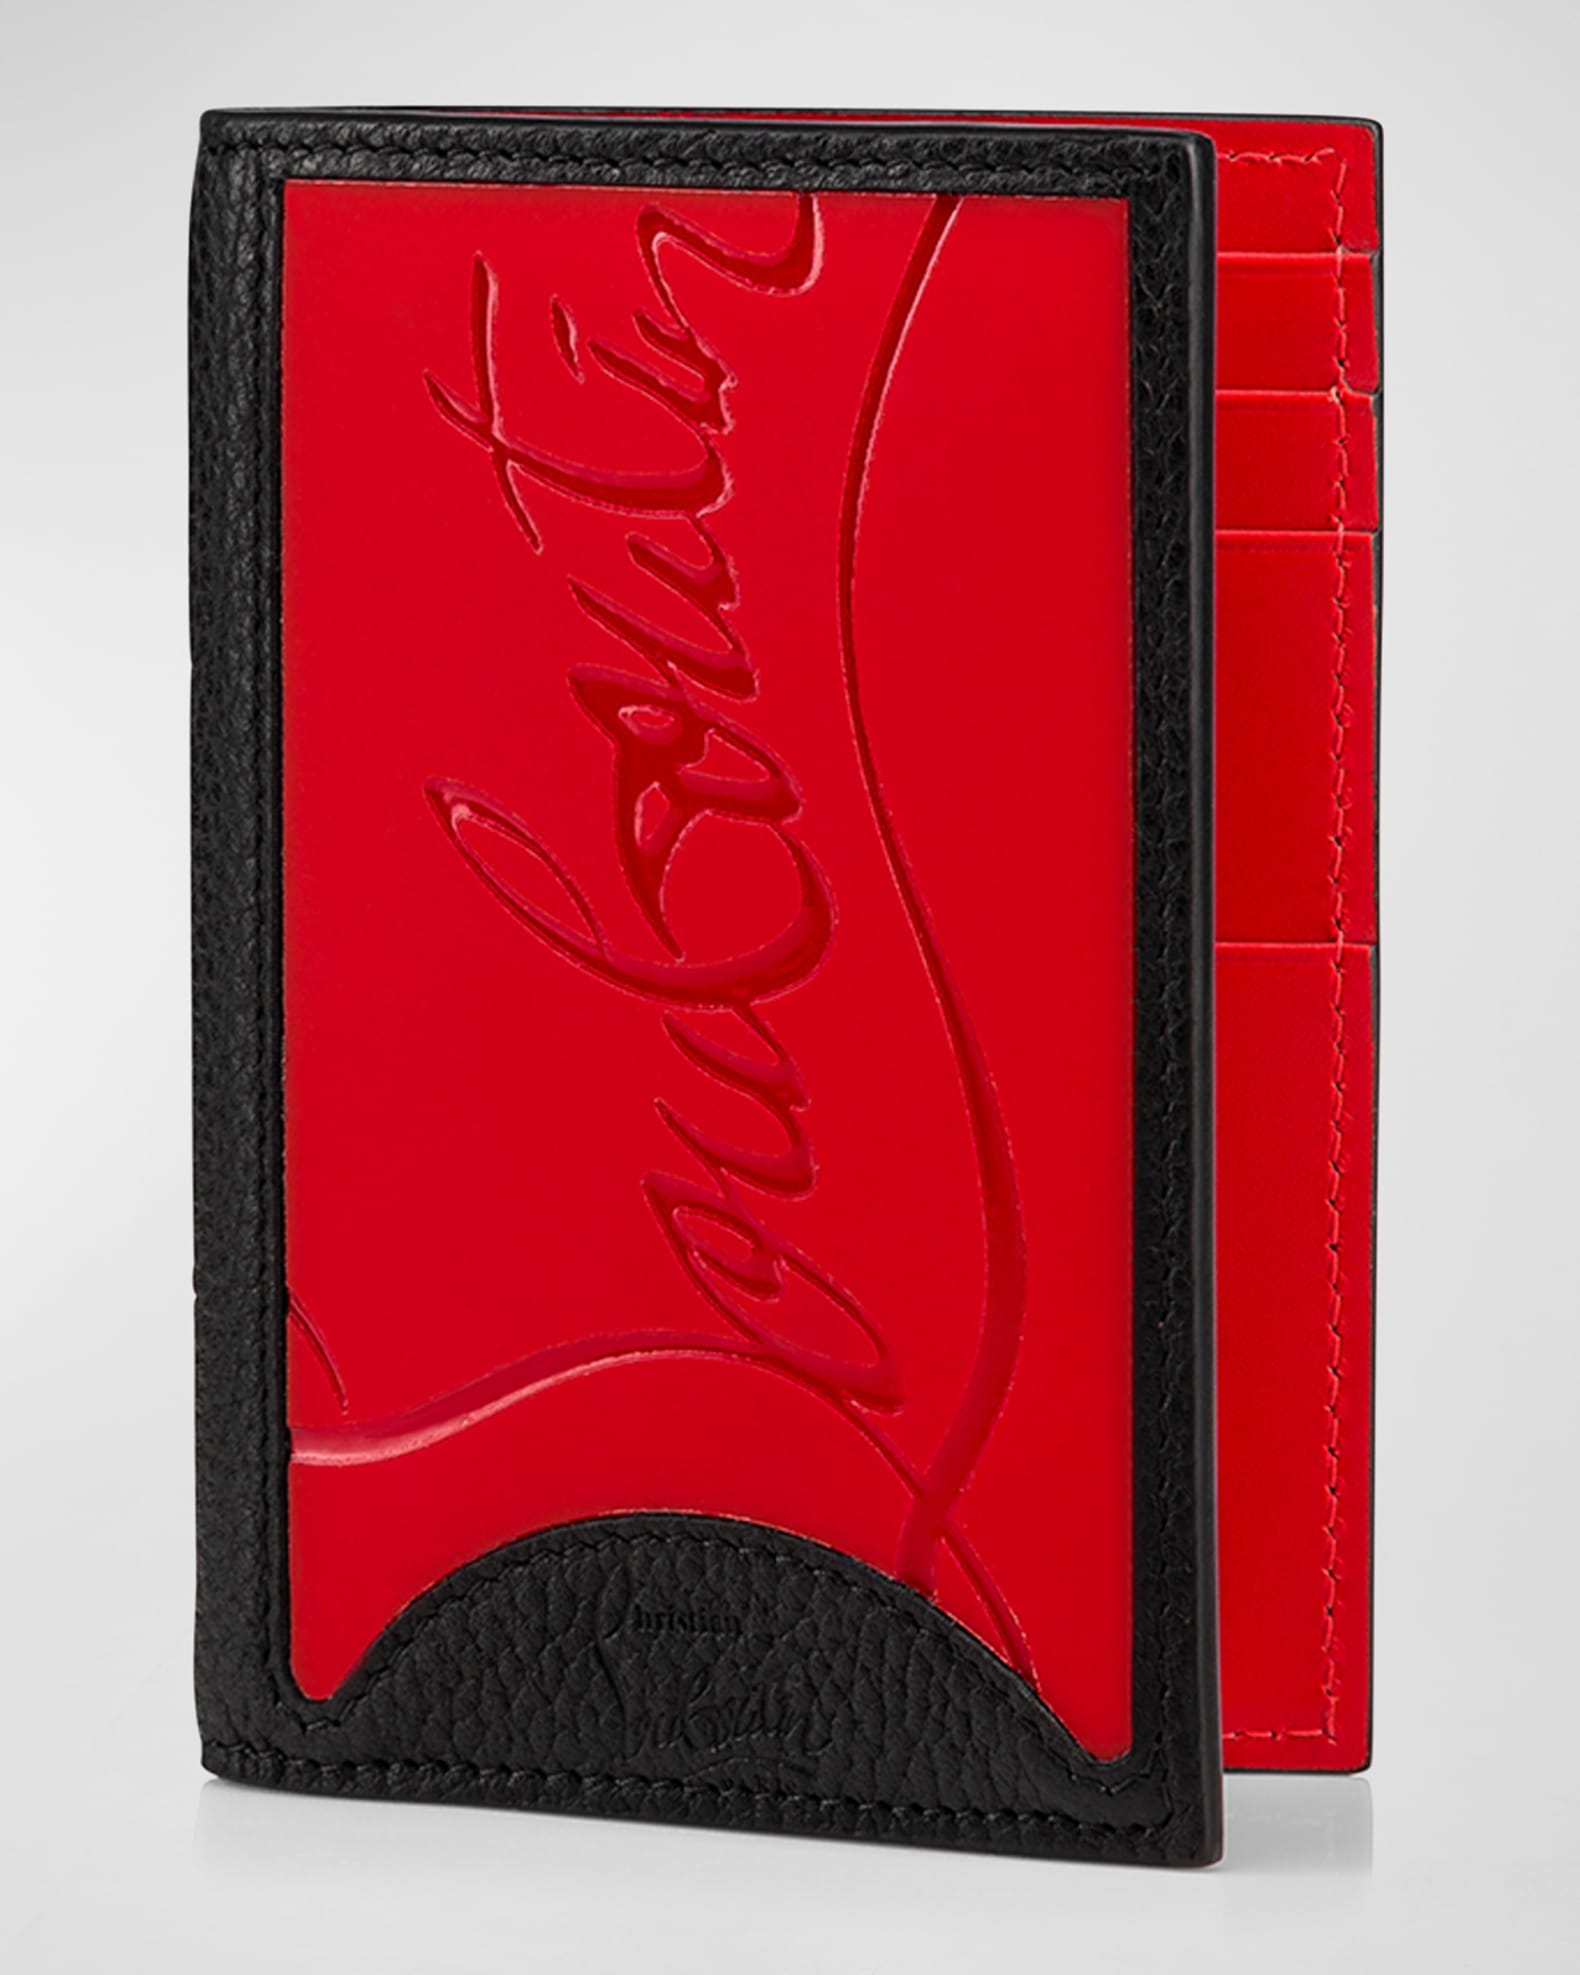 Coolcard Sneakers Wallet in Red - Christian Louboutin